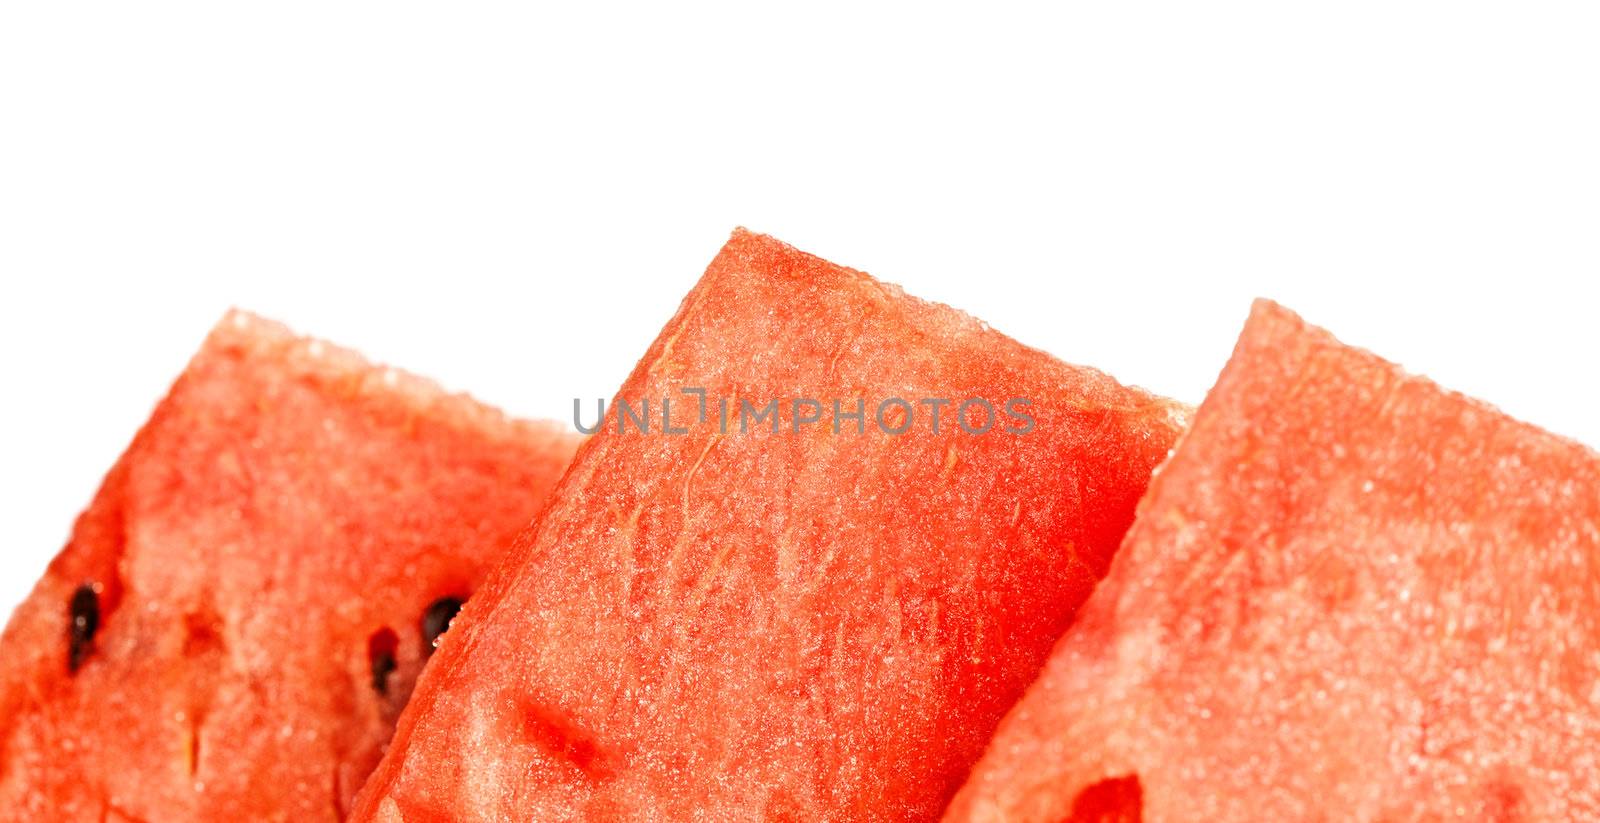 Slices of Watermelon by petr_malyshev